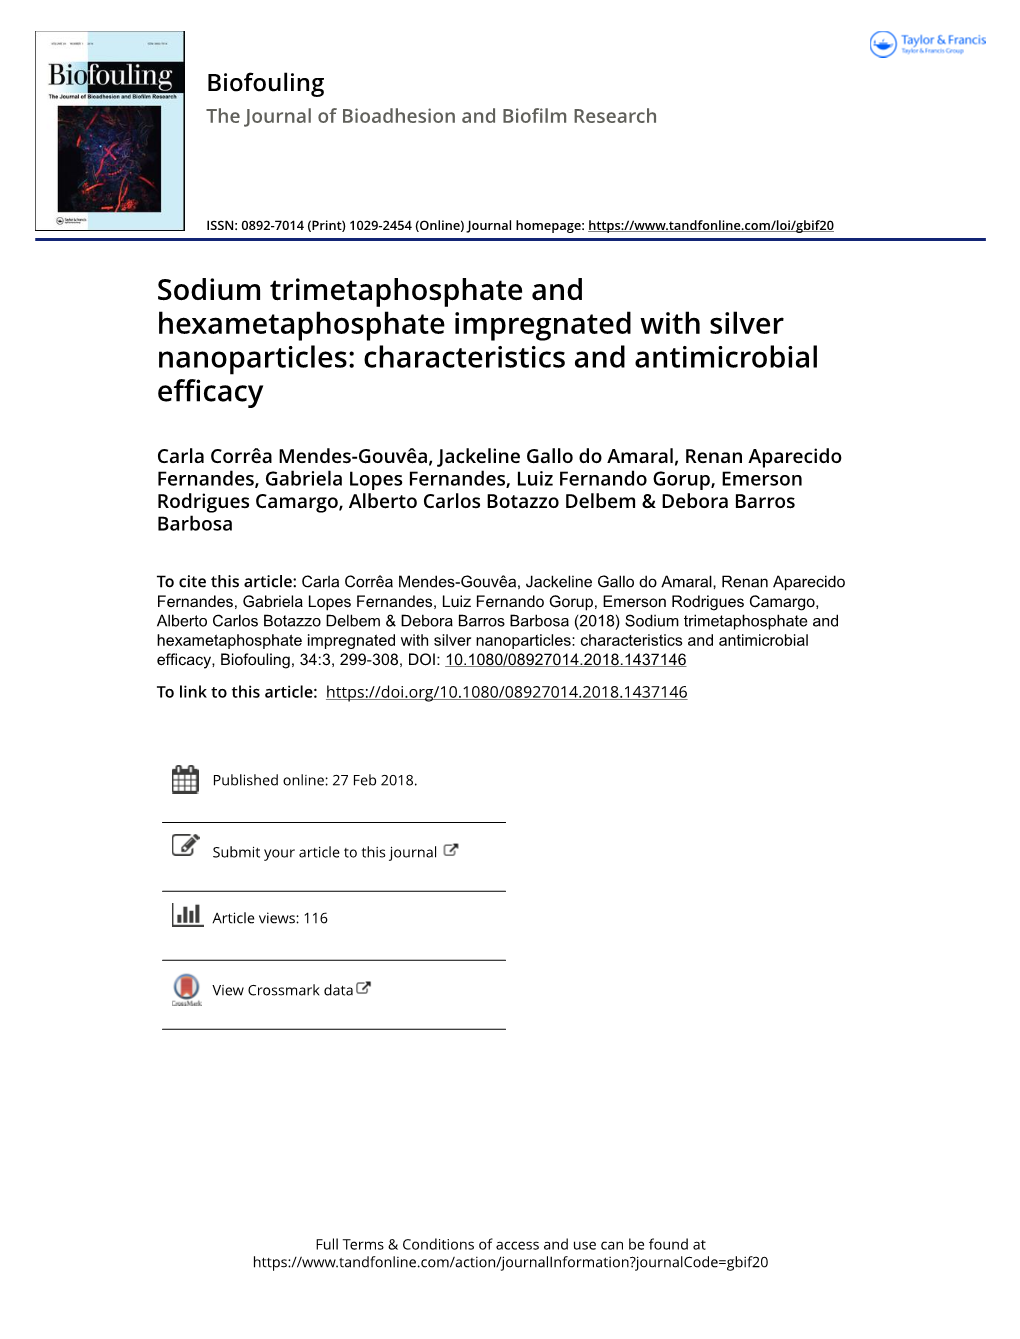 Sodium Trimetaphosphate and Hexametaphosphate Impregnated with Silver Nanoparticles: Characteristics and Antimicrobial Efficacy